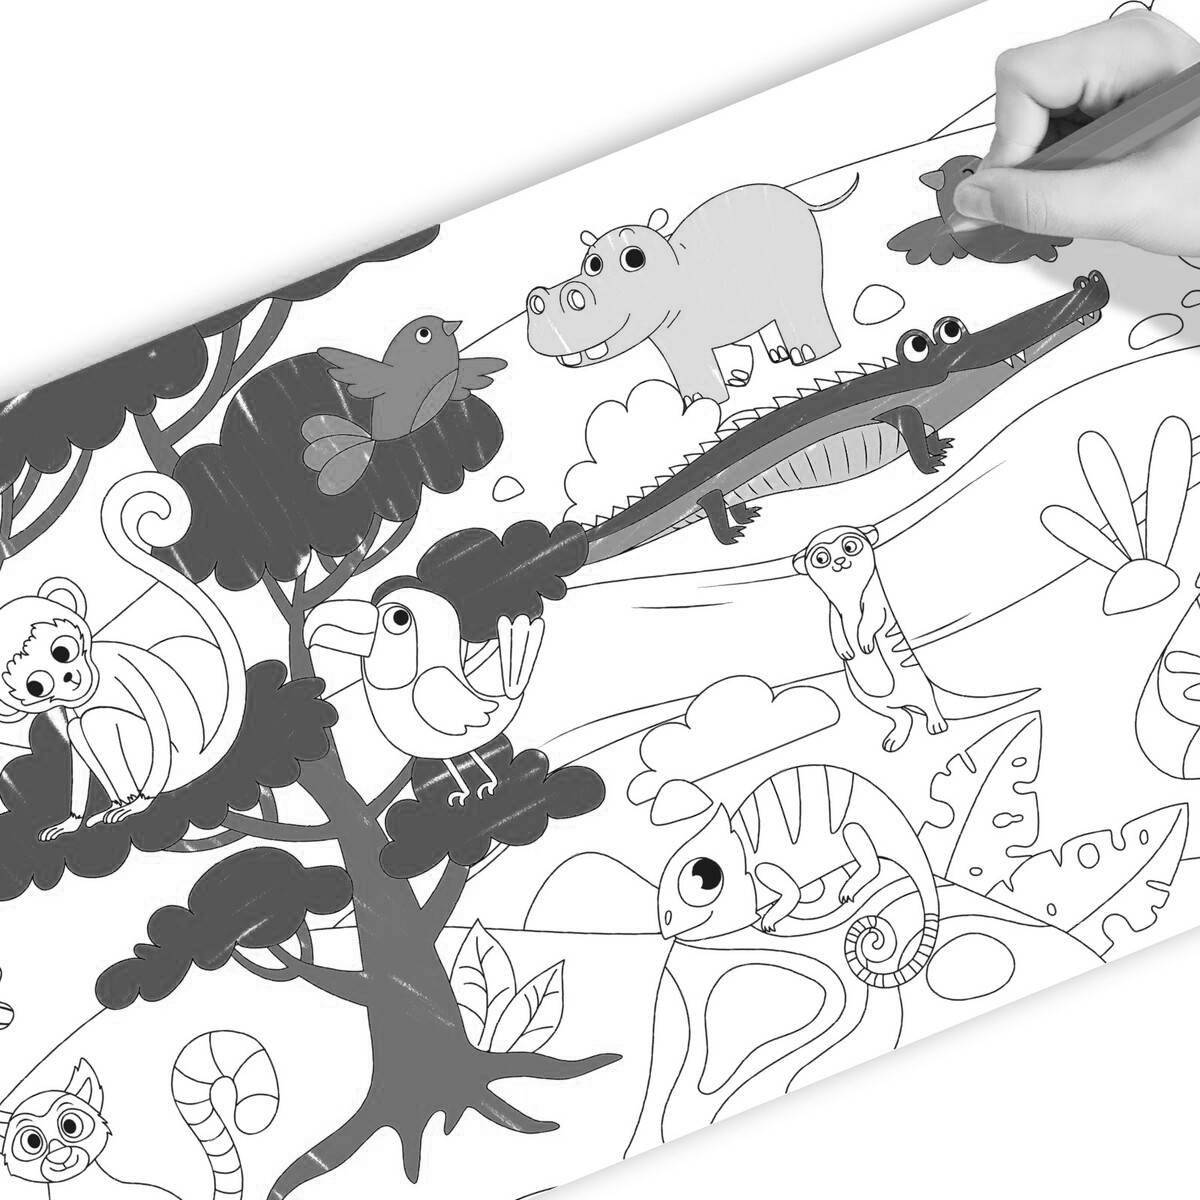 Ikea awesome coloring book on a roll